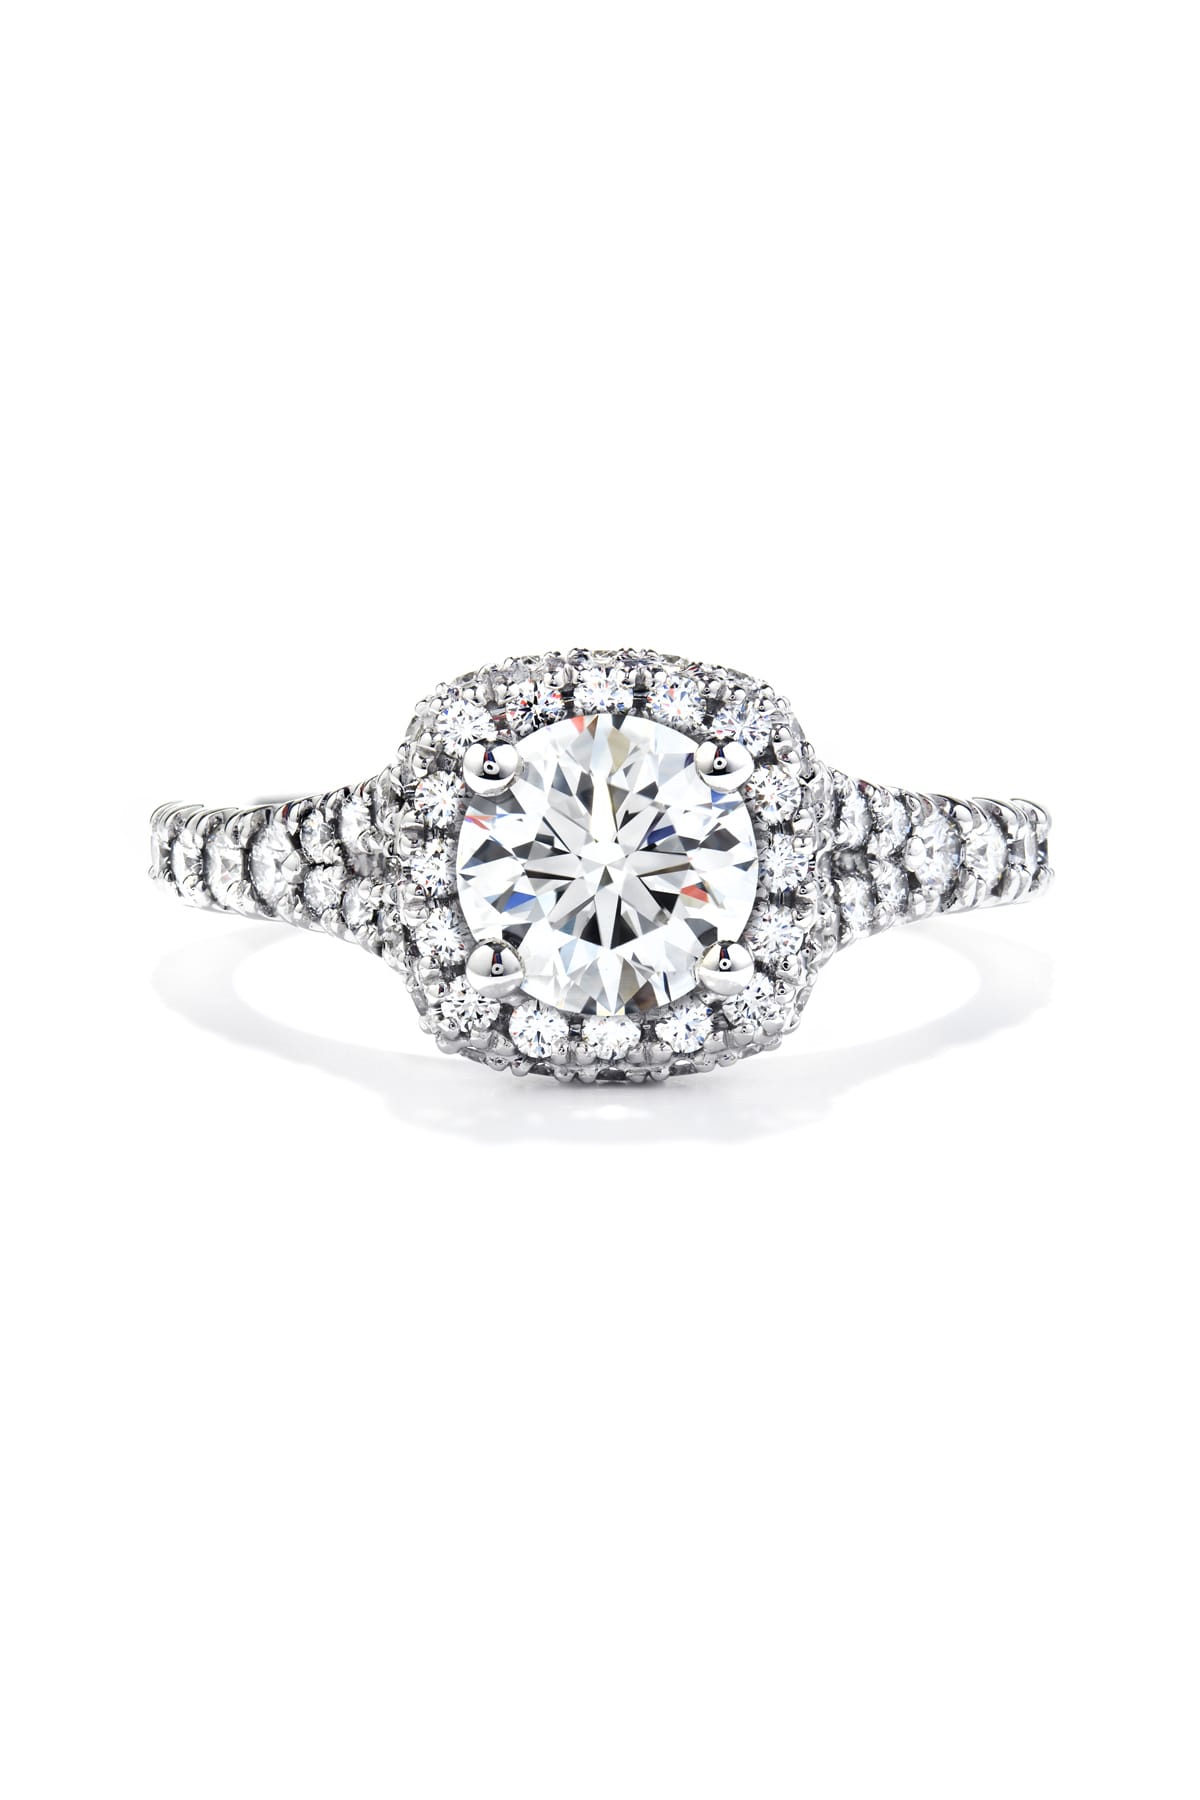 Acclaim Engagement Ring From Hearts On Fire available at LeGassick Diamonds and Jewellery Gold Coast, Australia.